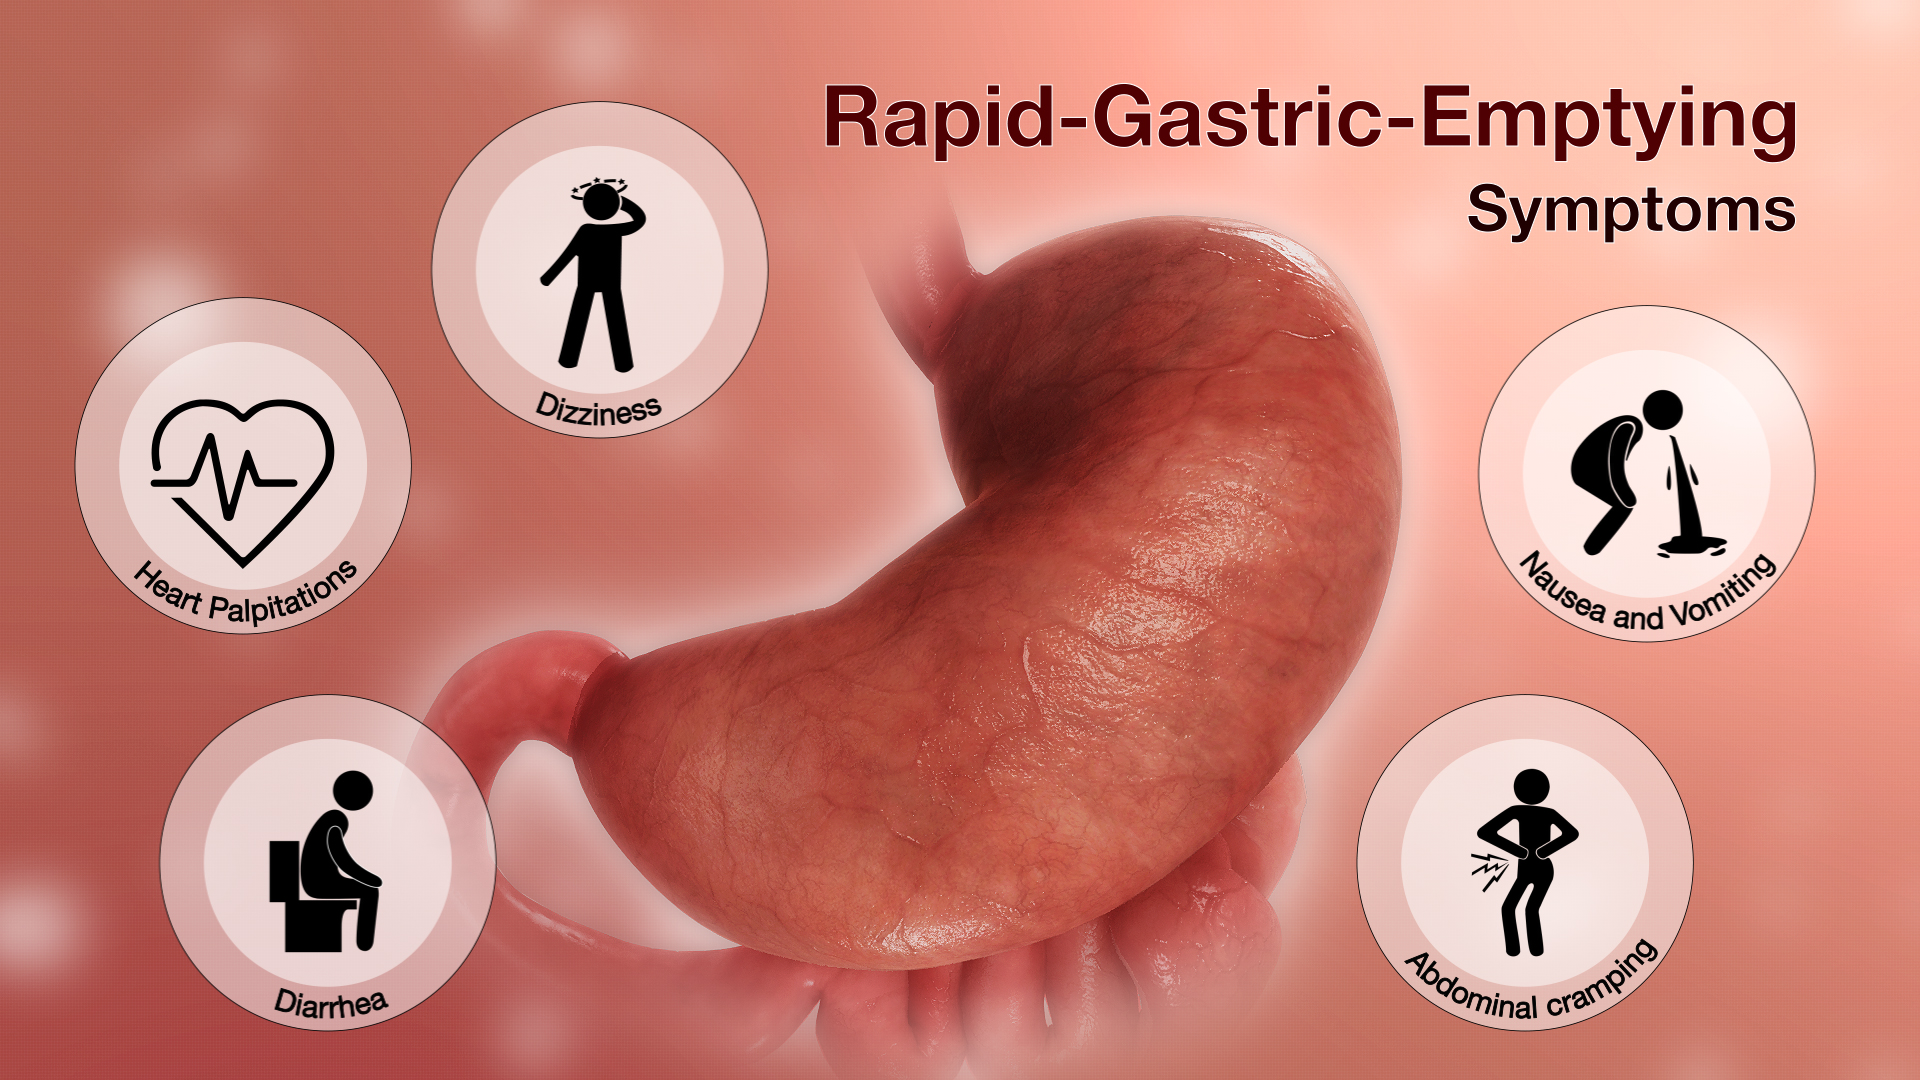 Medical Animation Showing Symptoms of Rapid Gastric Emptying